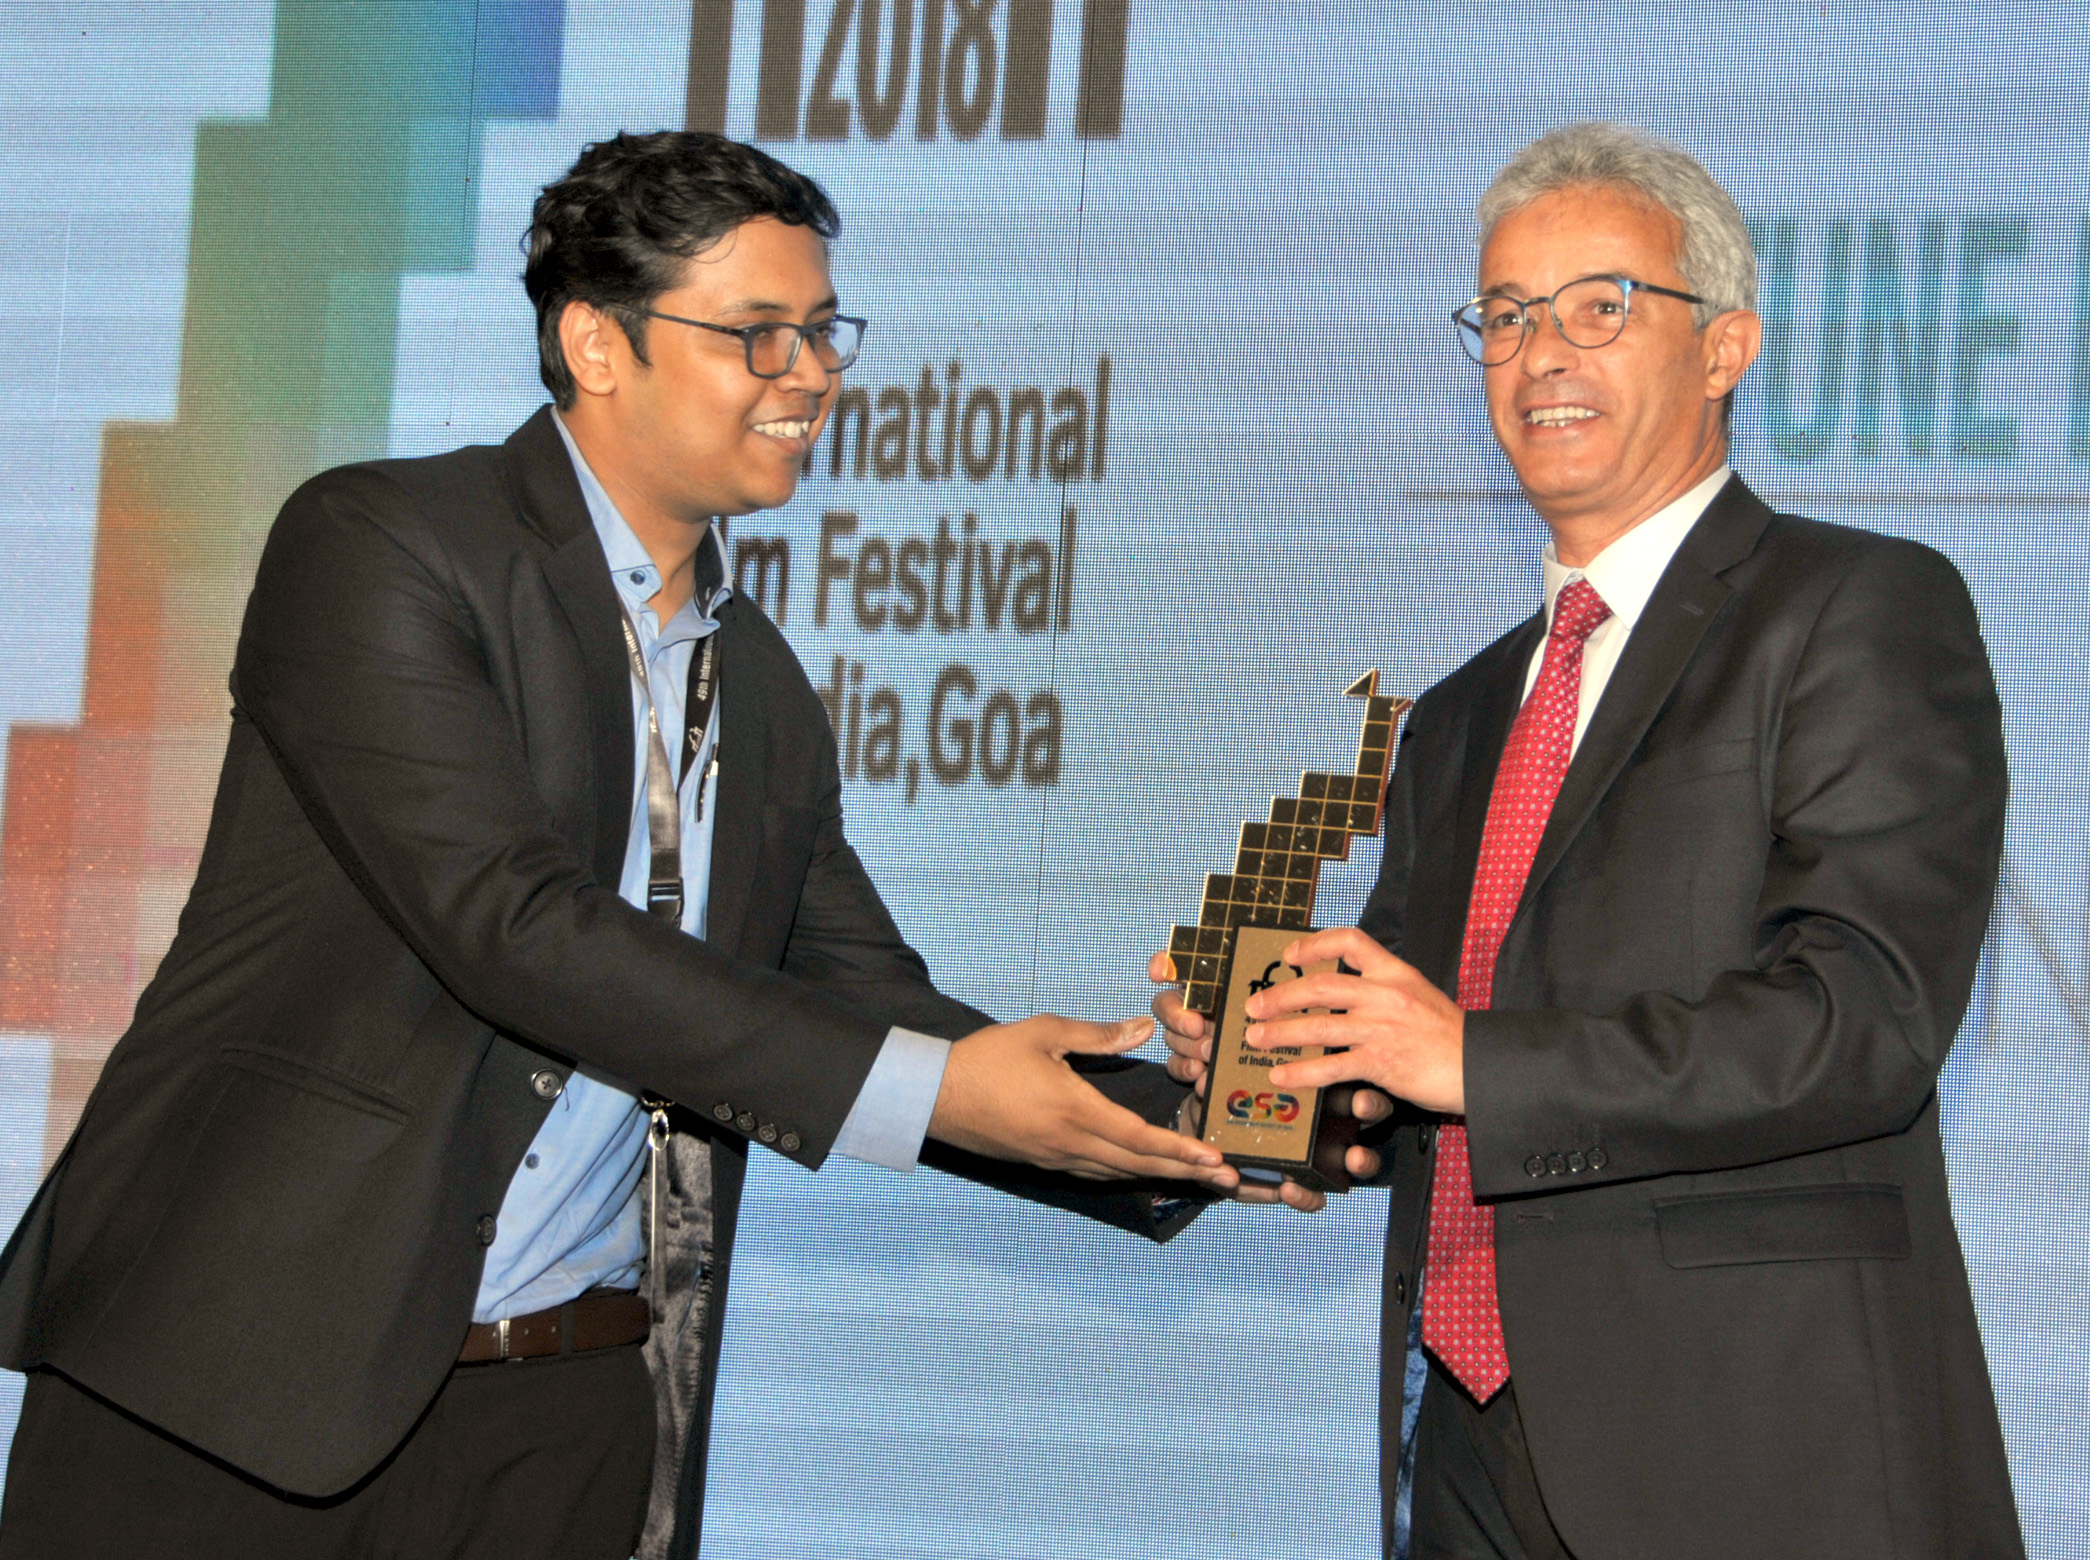 Sh. Ankur Lahoty Assistant Director, DFF presenting memento to His excellency Ambassador of Tunisia Sh. N Lakhal after his in-conversation session on Film Making in Tunisia.